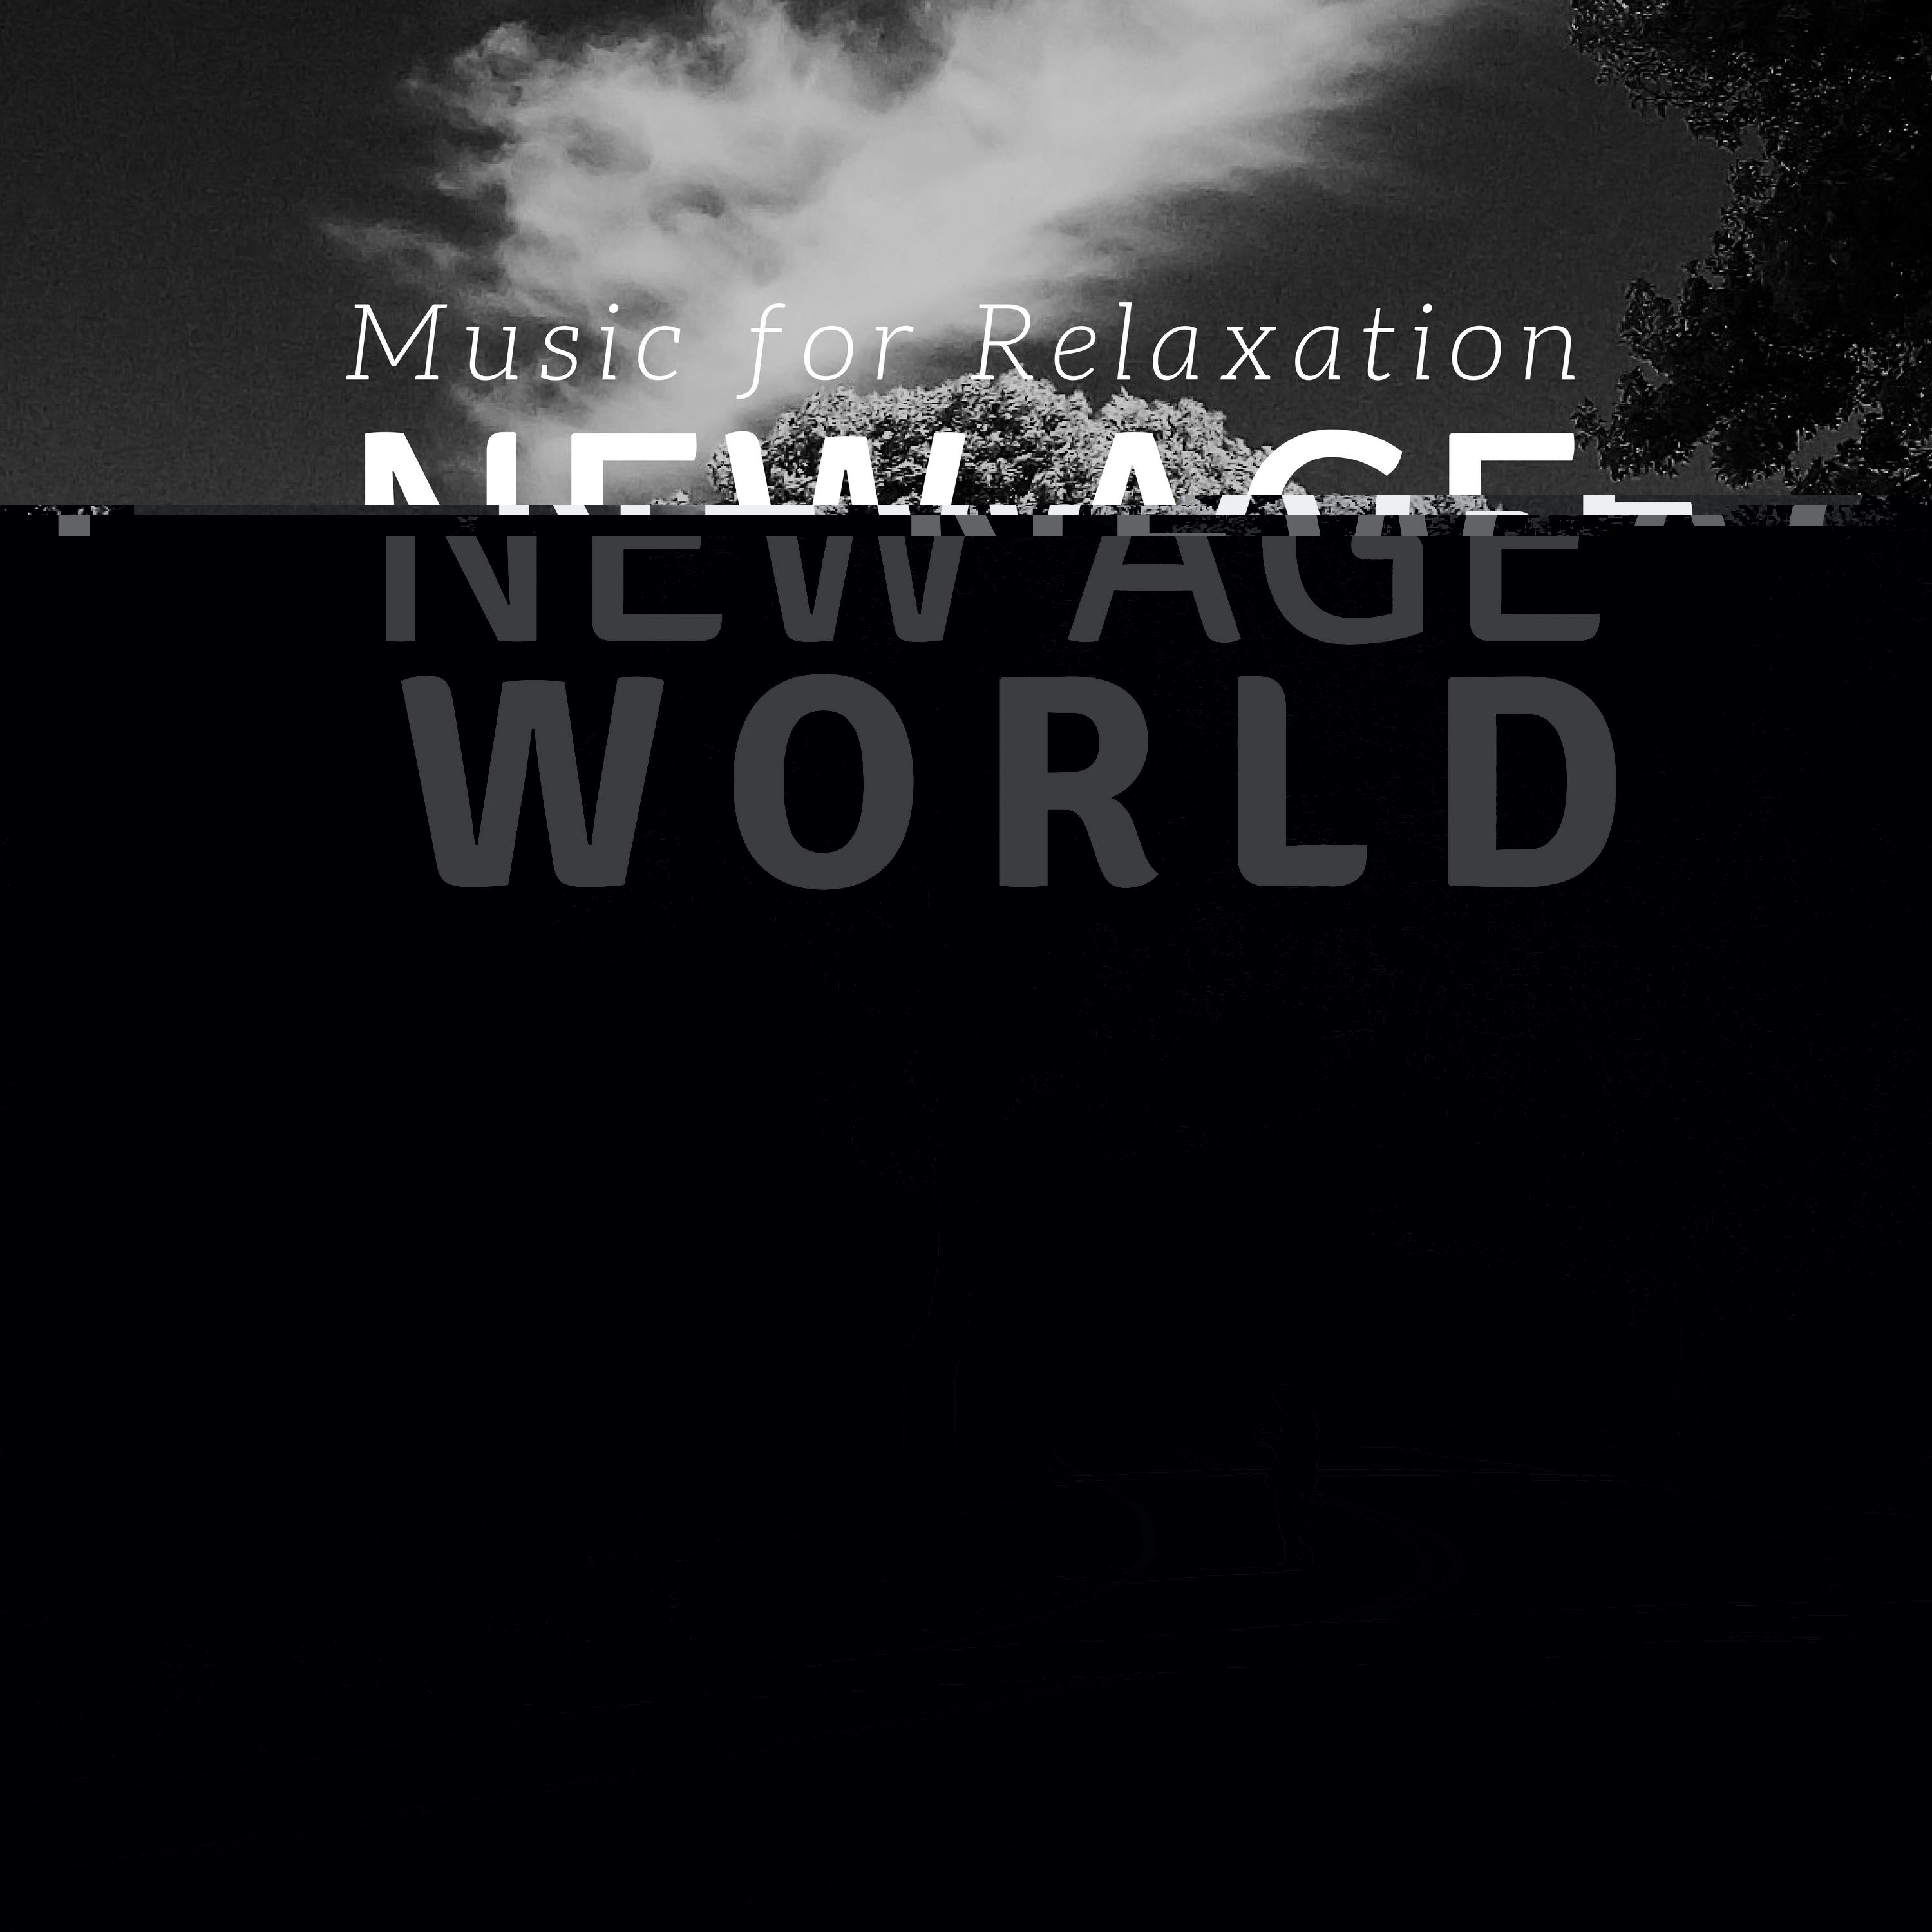 New Age World - Music for Relaxation, Meditation, Sleep, Concentration, Stress Relief